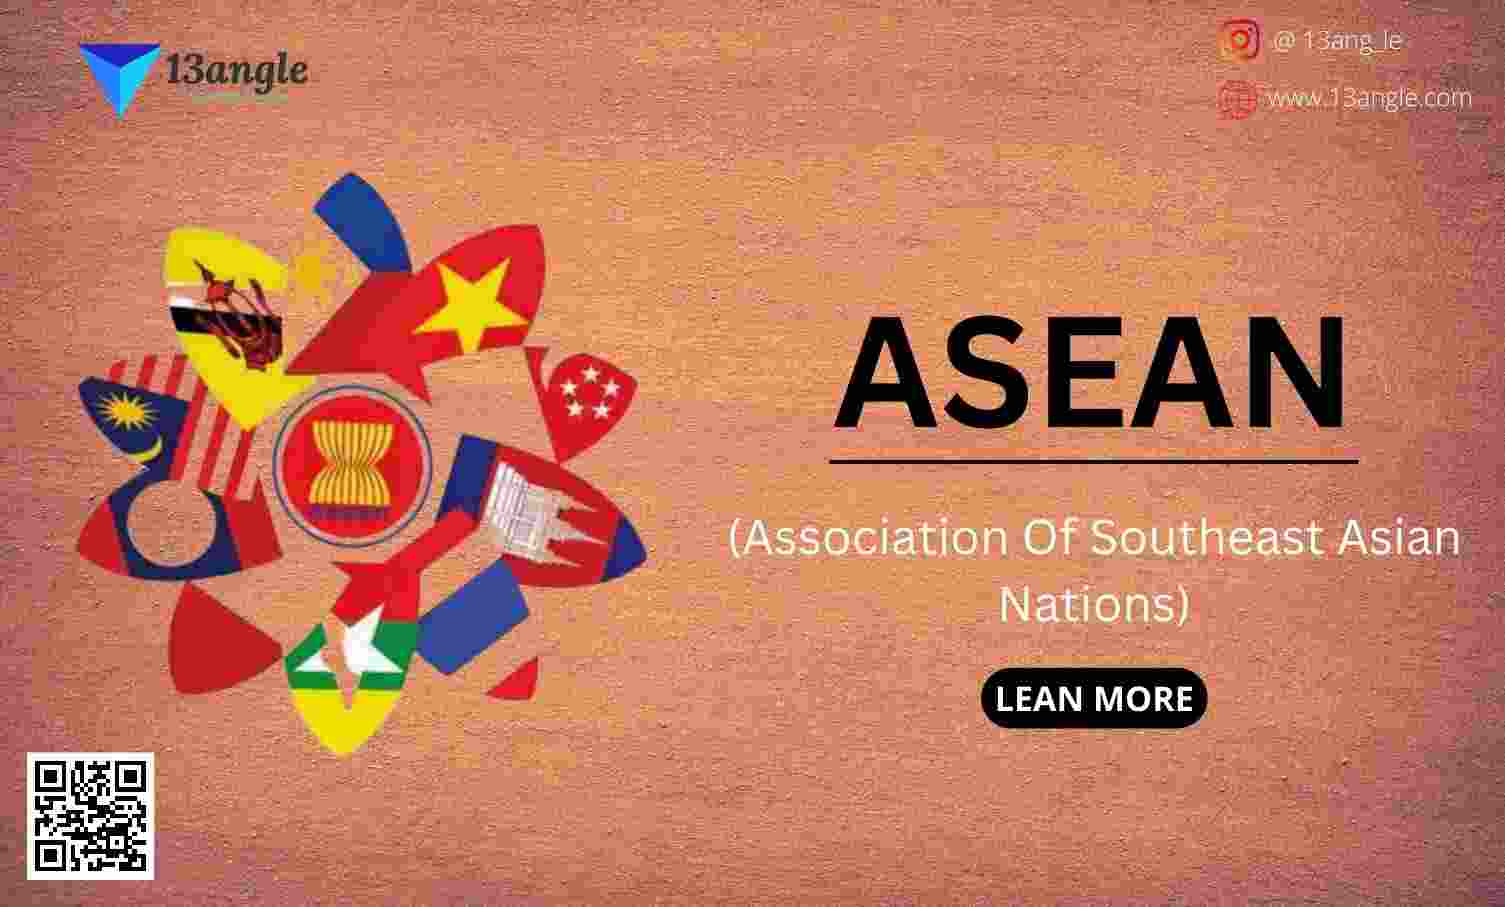 ASEAN (Association Of Southeast Asian Nations)- 13angle.com